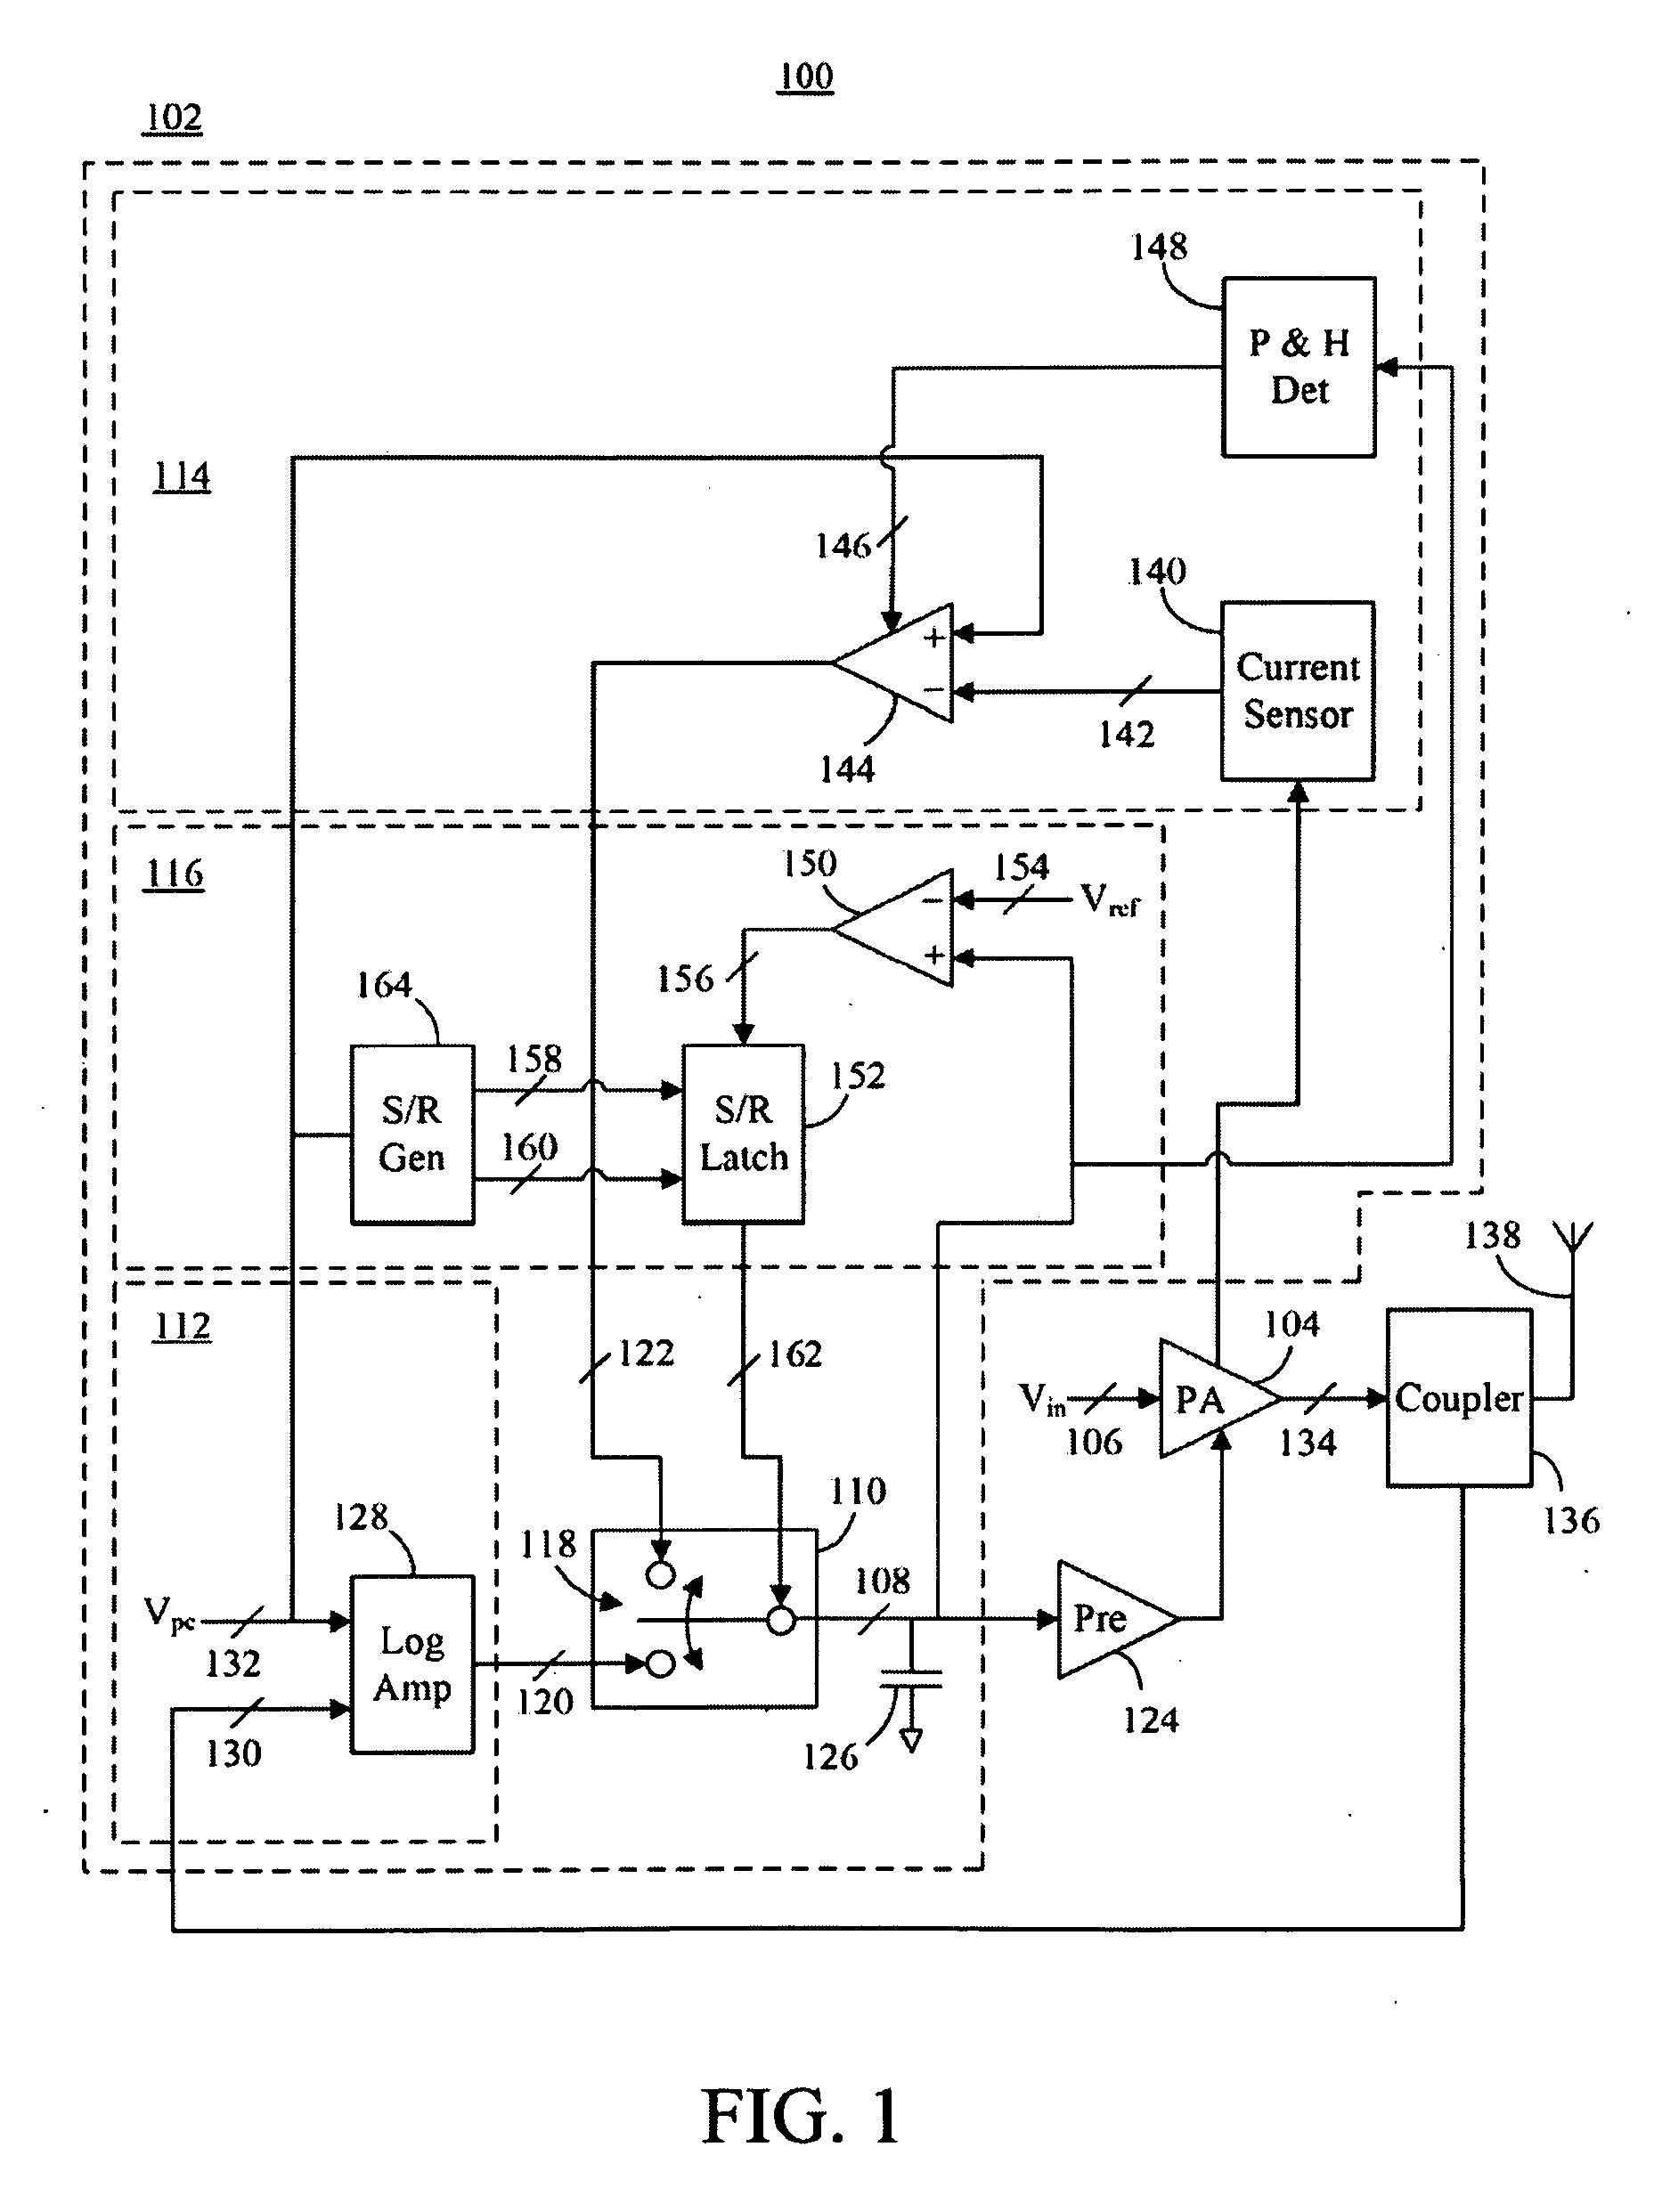 Hybrid power control for a power amplifier